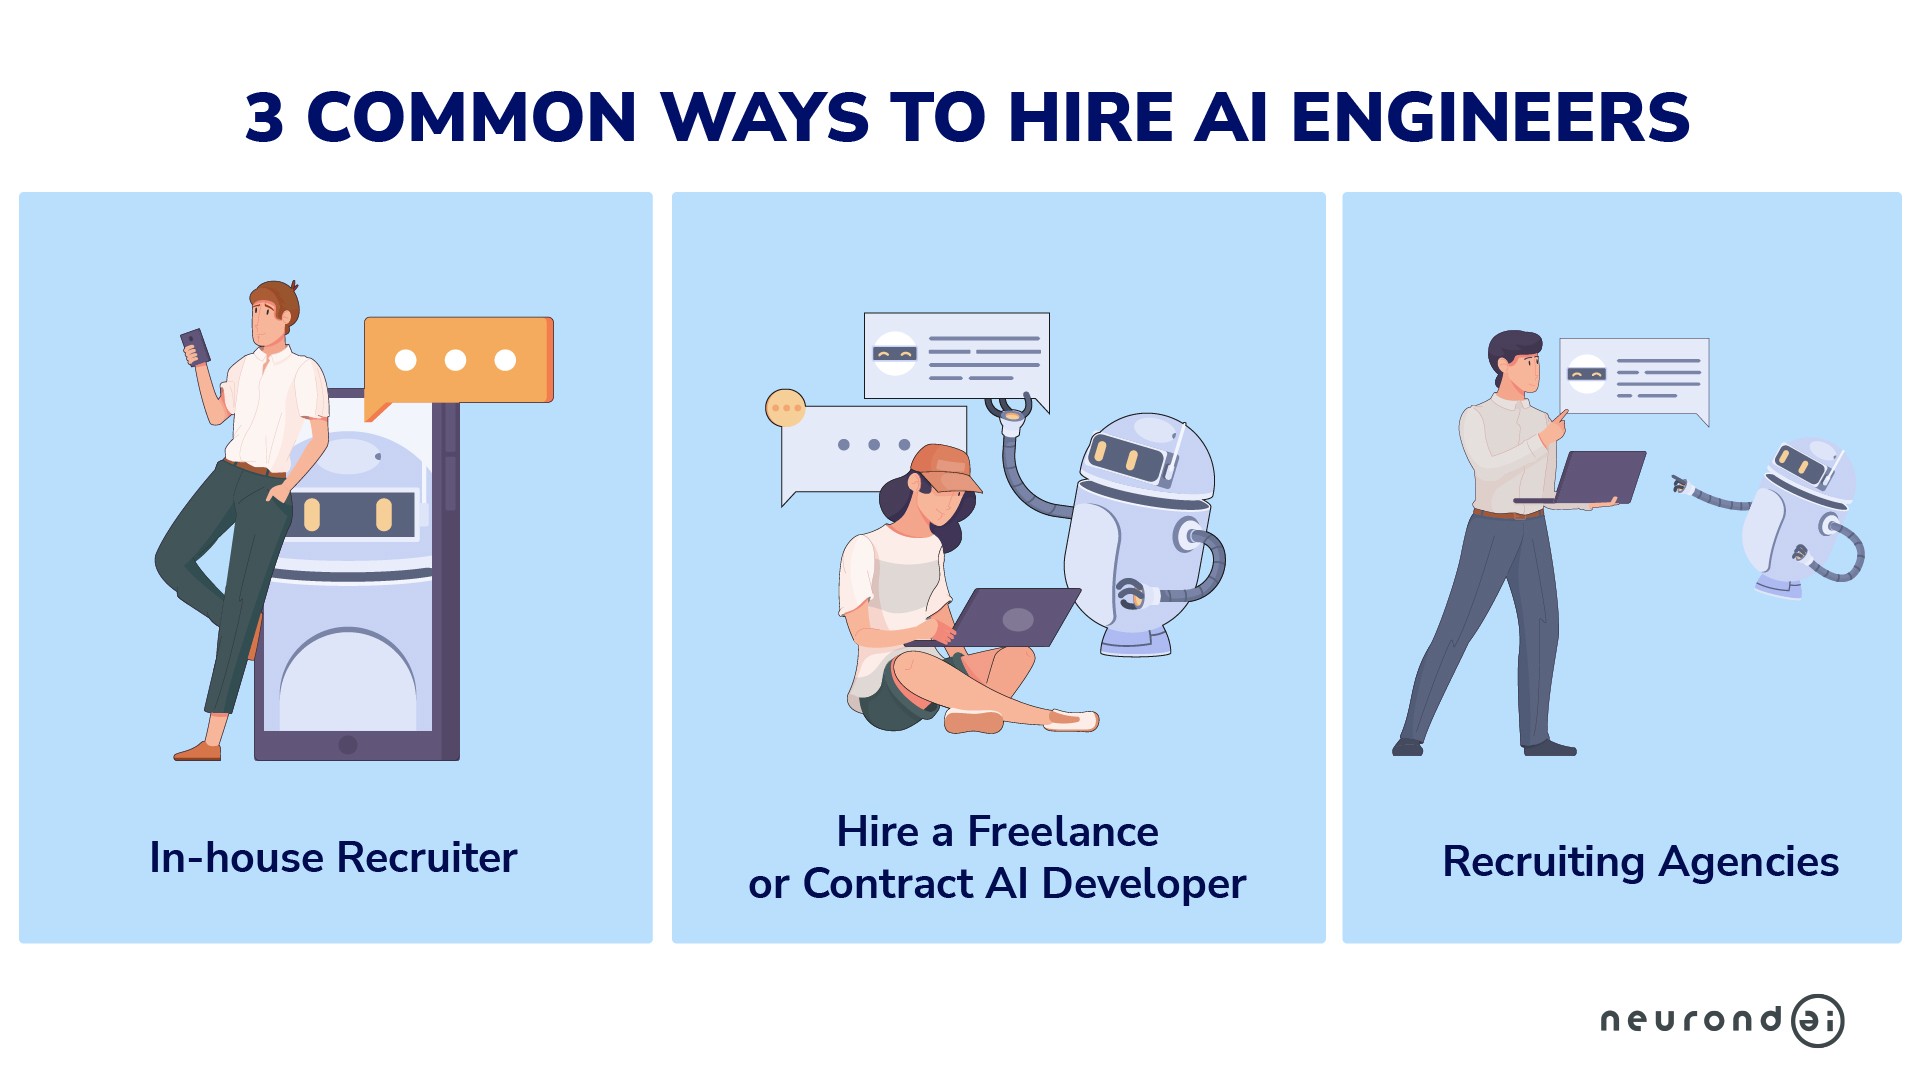 3 Common Ways to Hire AI Engineers